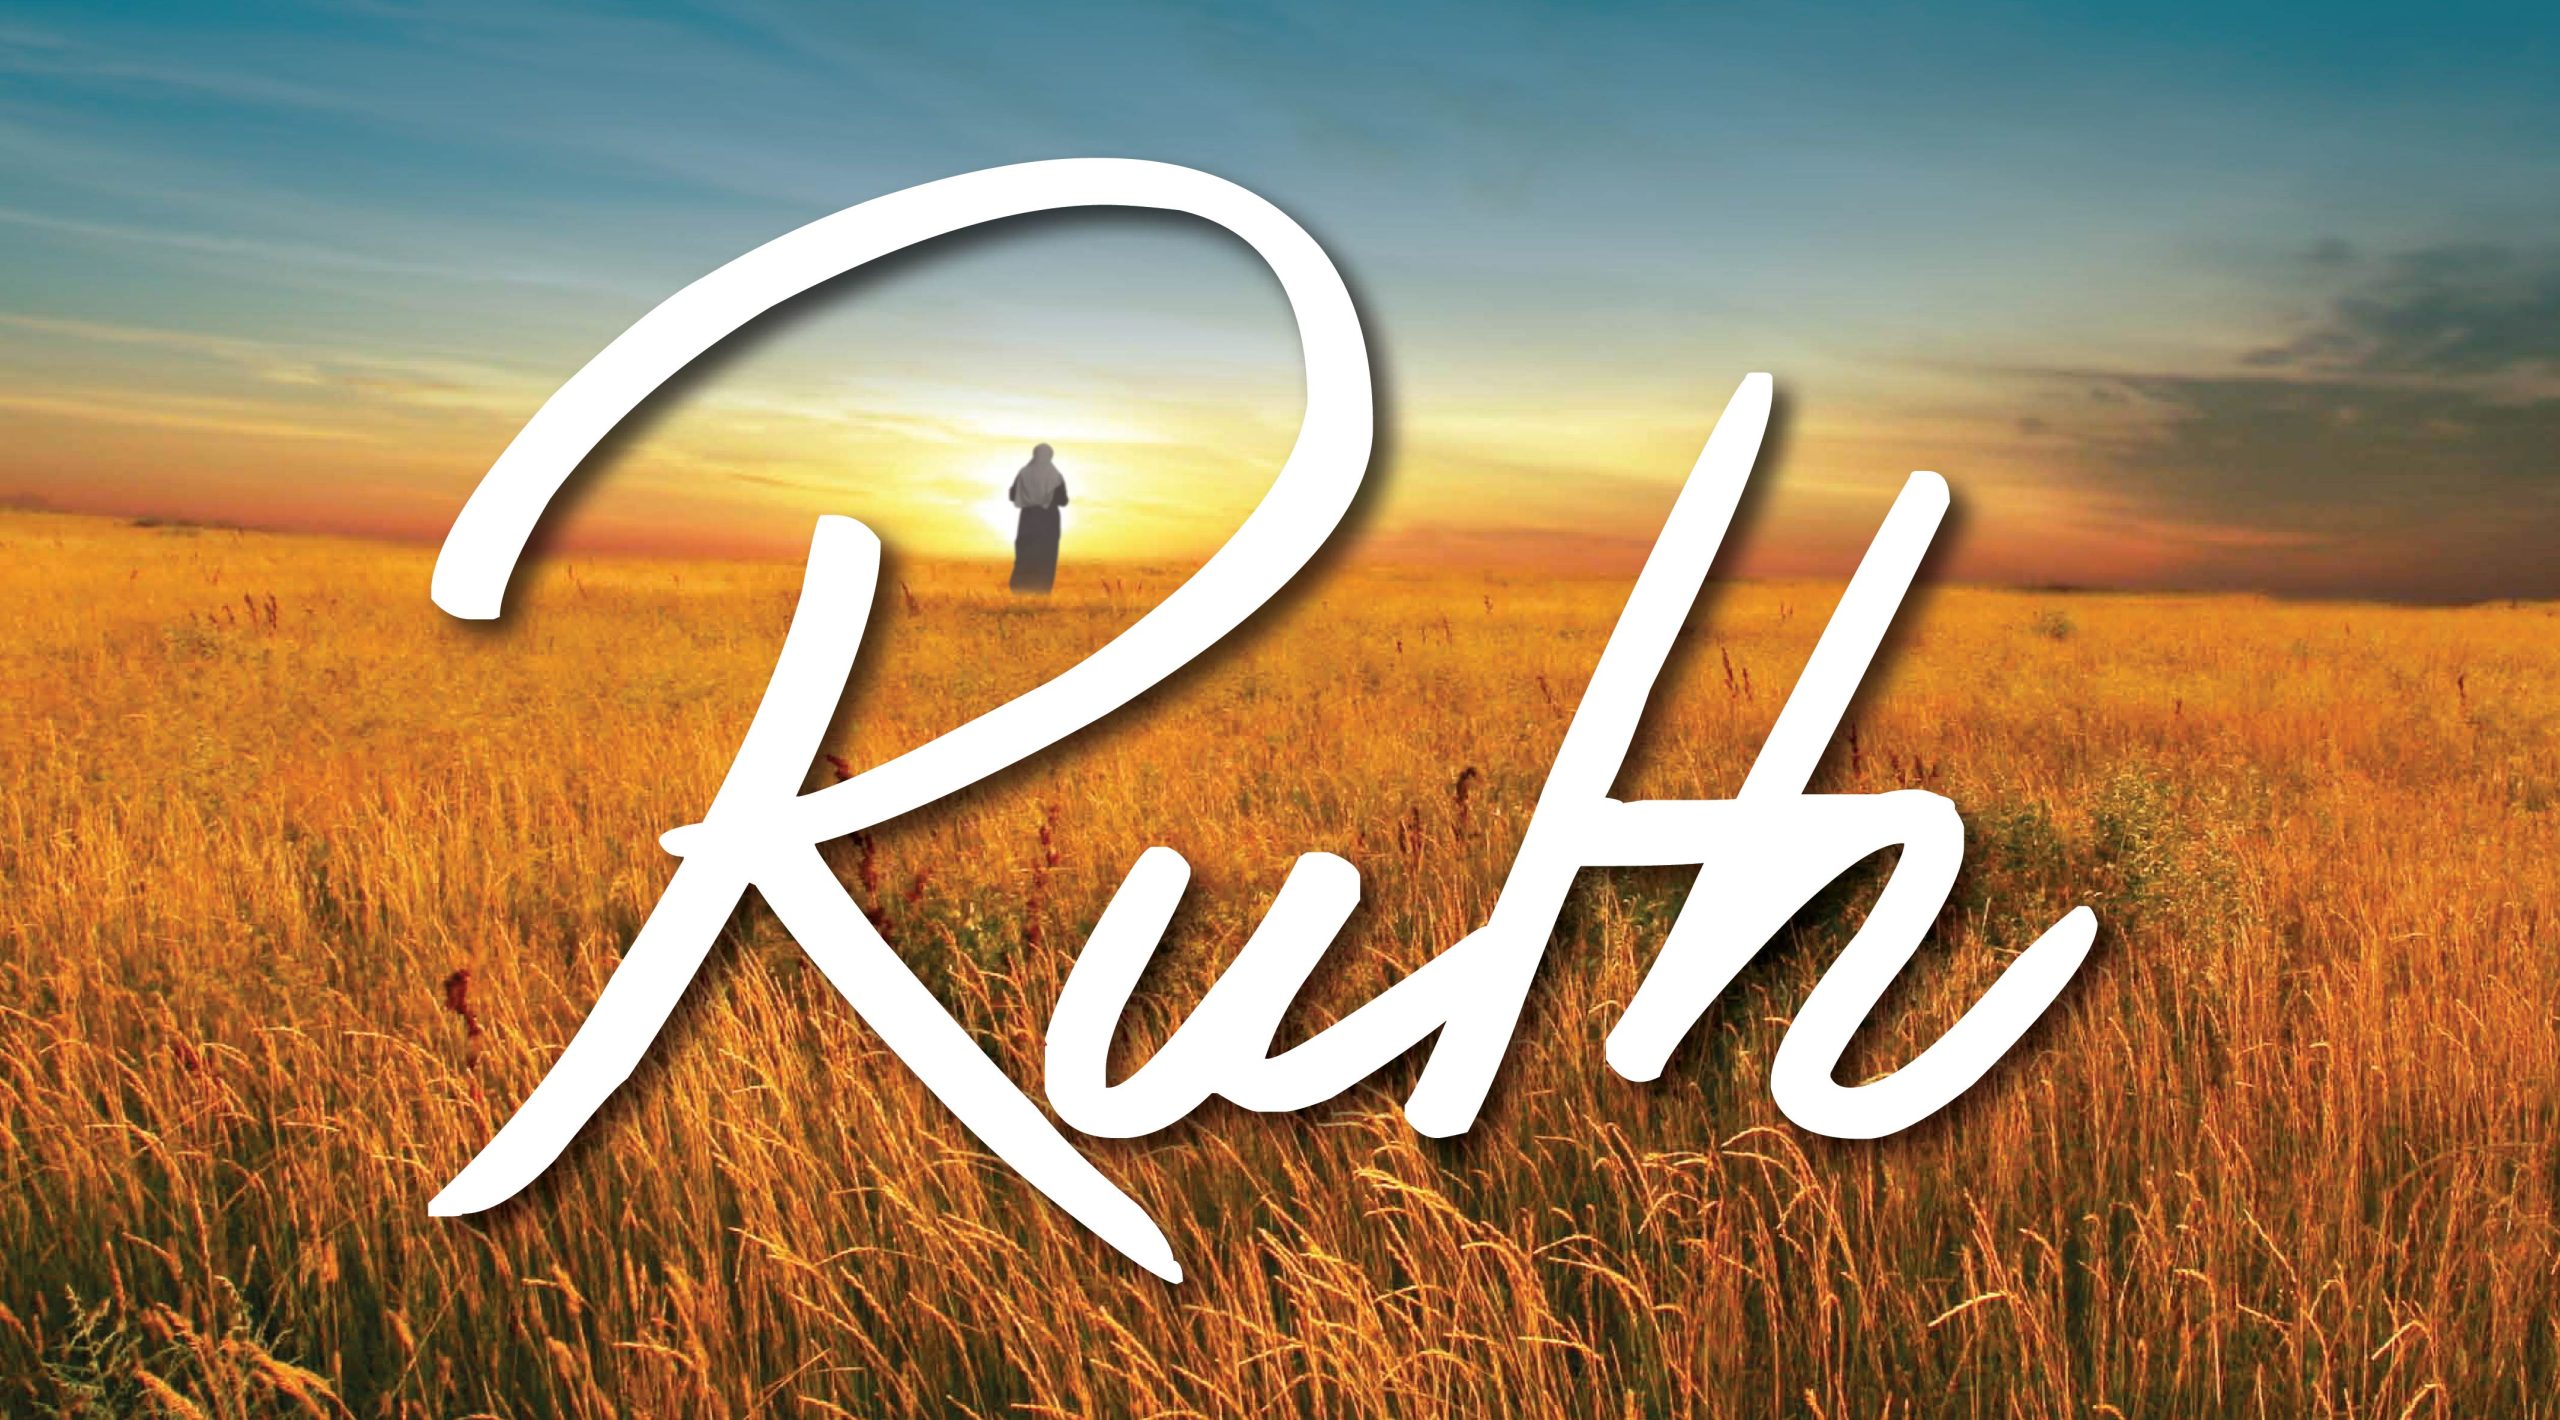 Ruth - The Beauty of Redemption